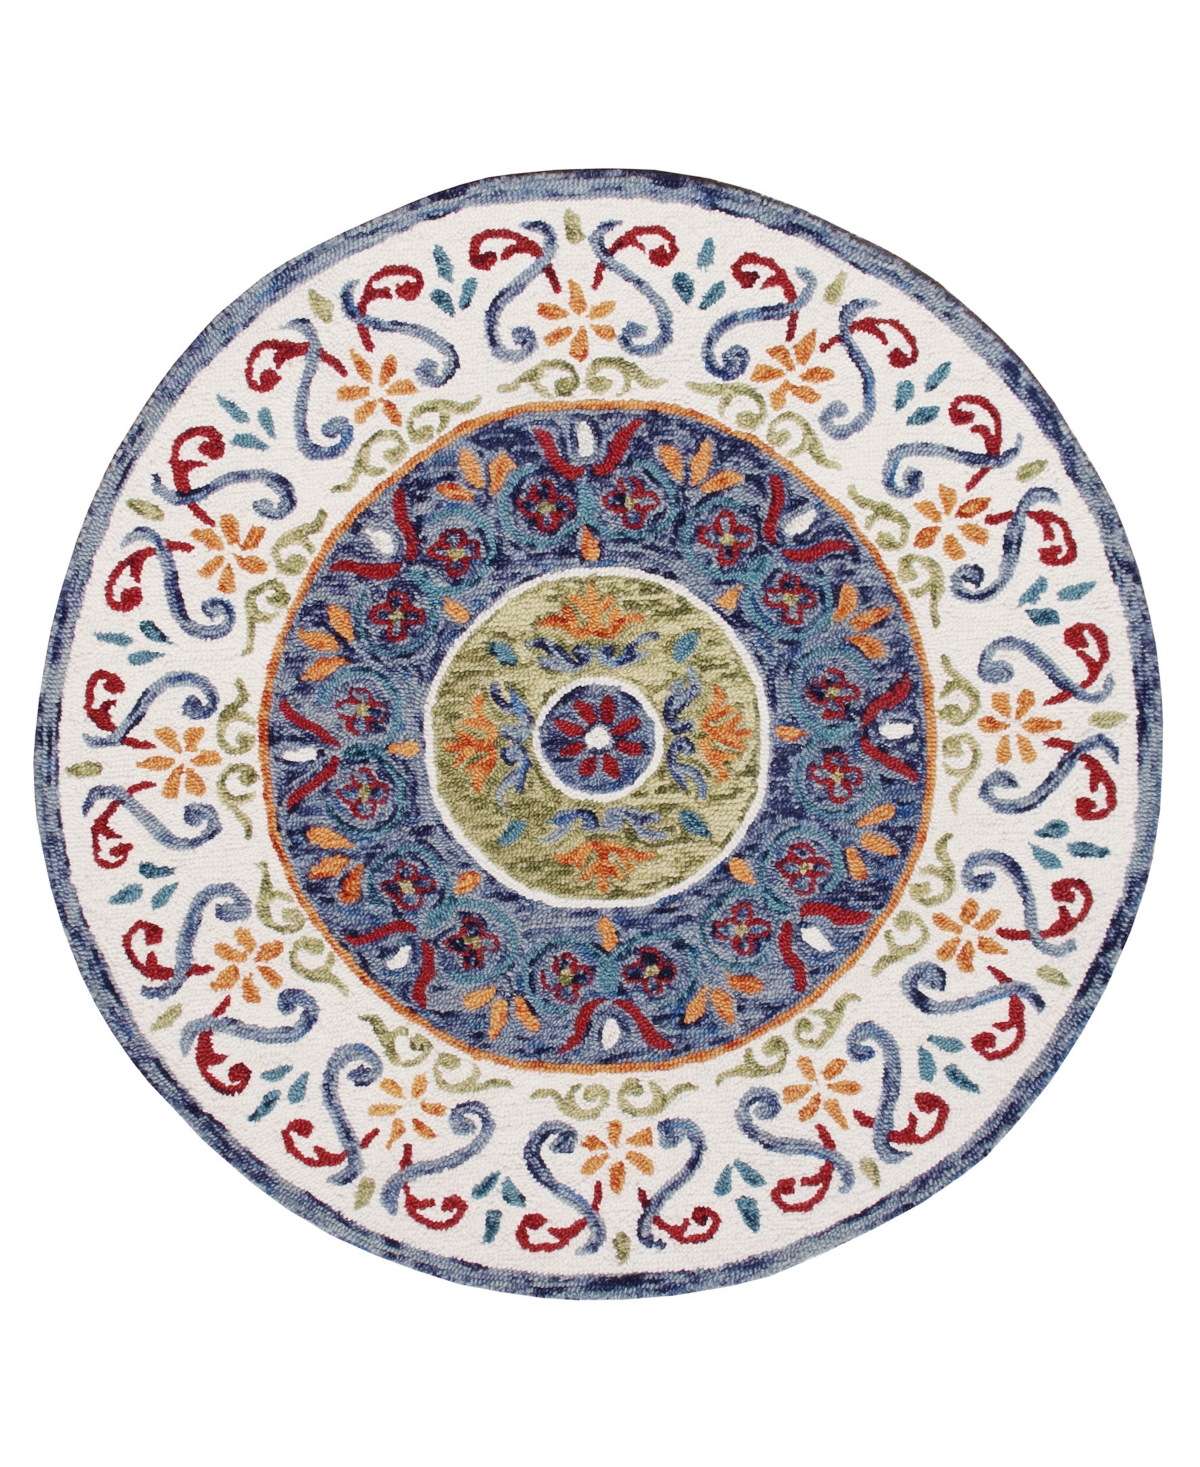 Lr Home Sweet Sinuo54155 6' X 6' Round Area Rug In White